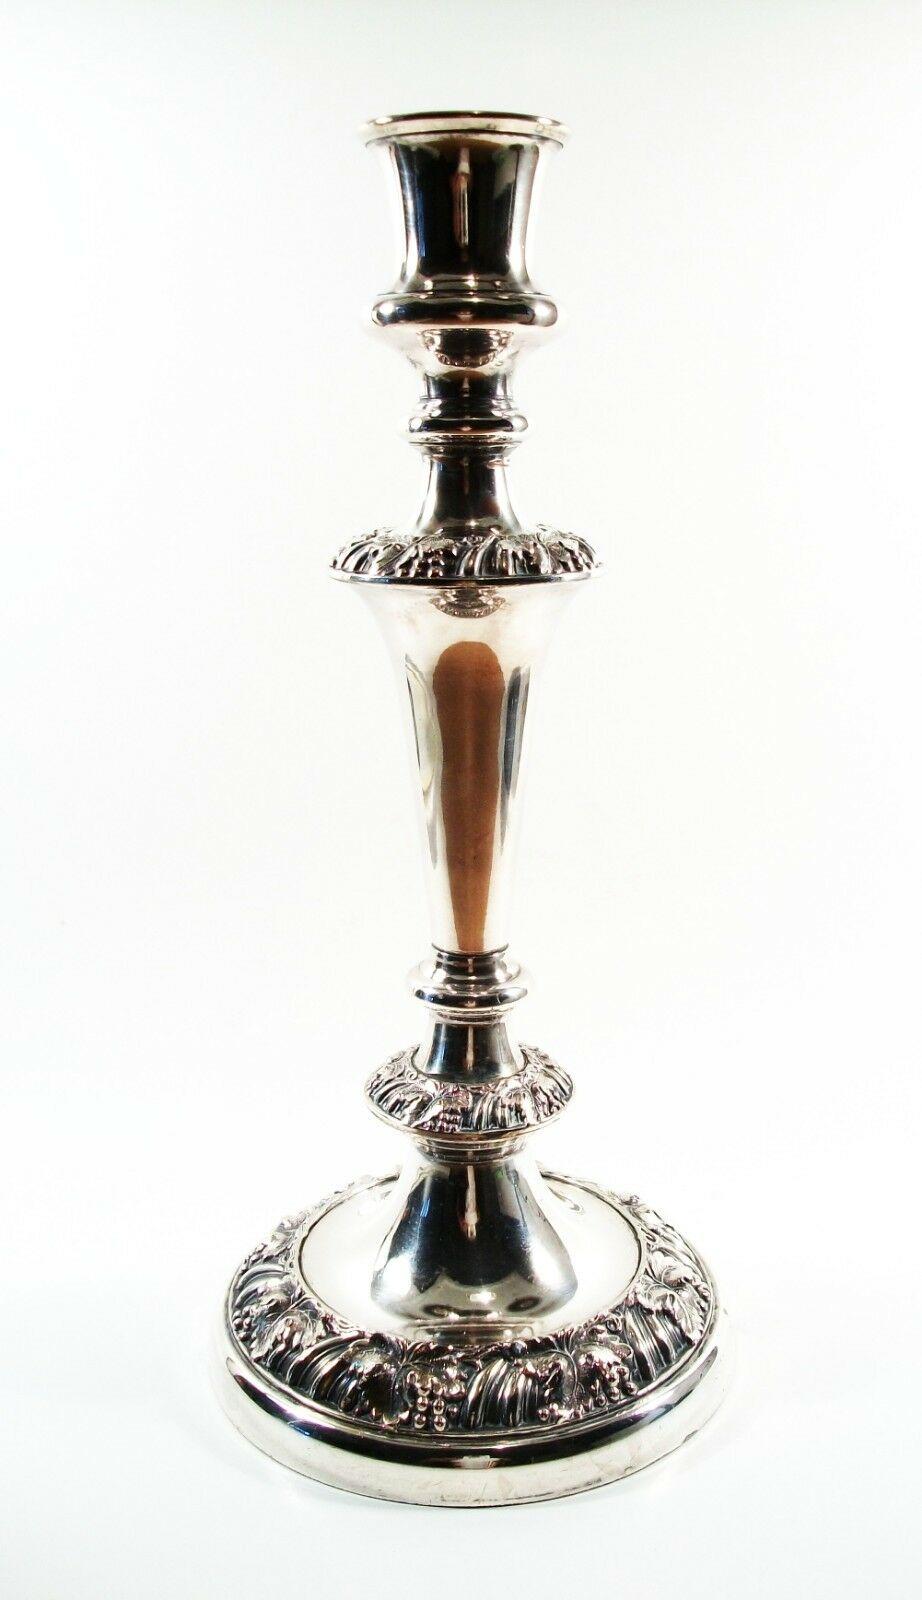 British Ellis Barker, Antique Silver Plate Candlestick, England, Early 20th Century For Sale